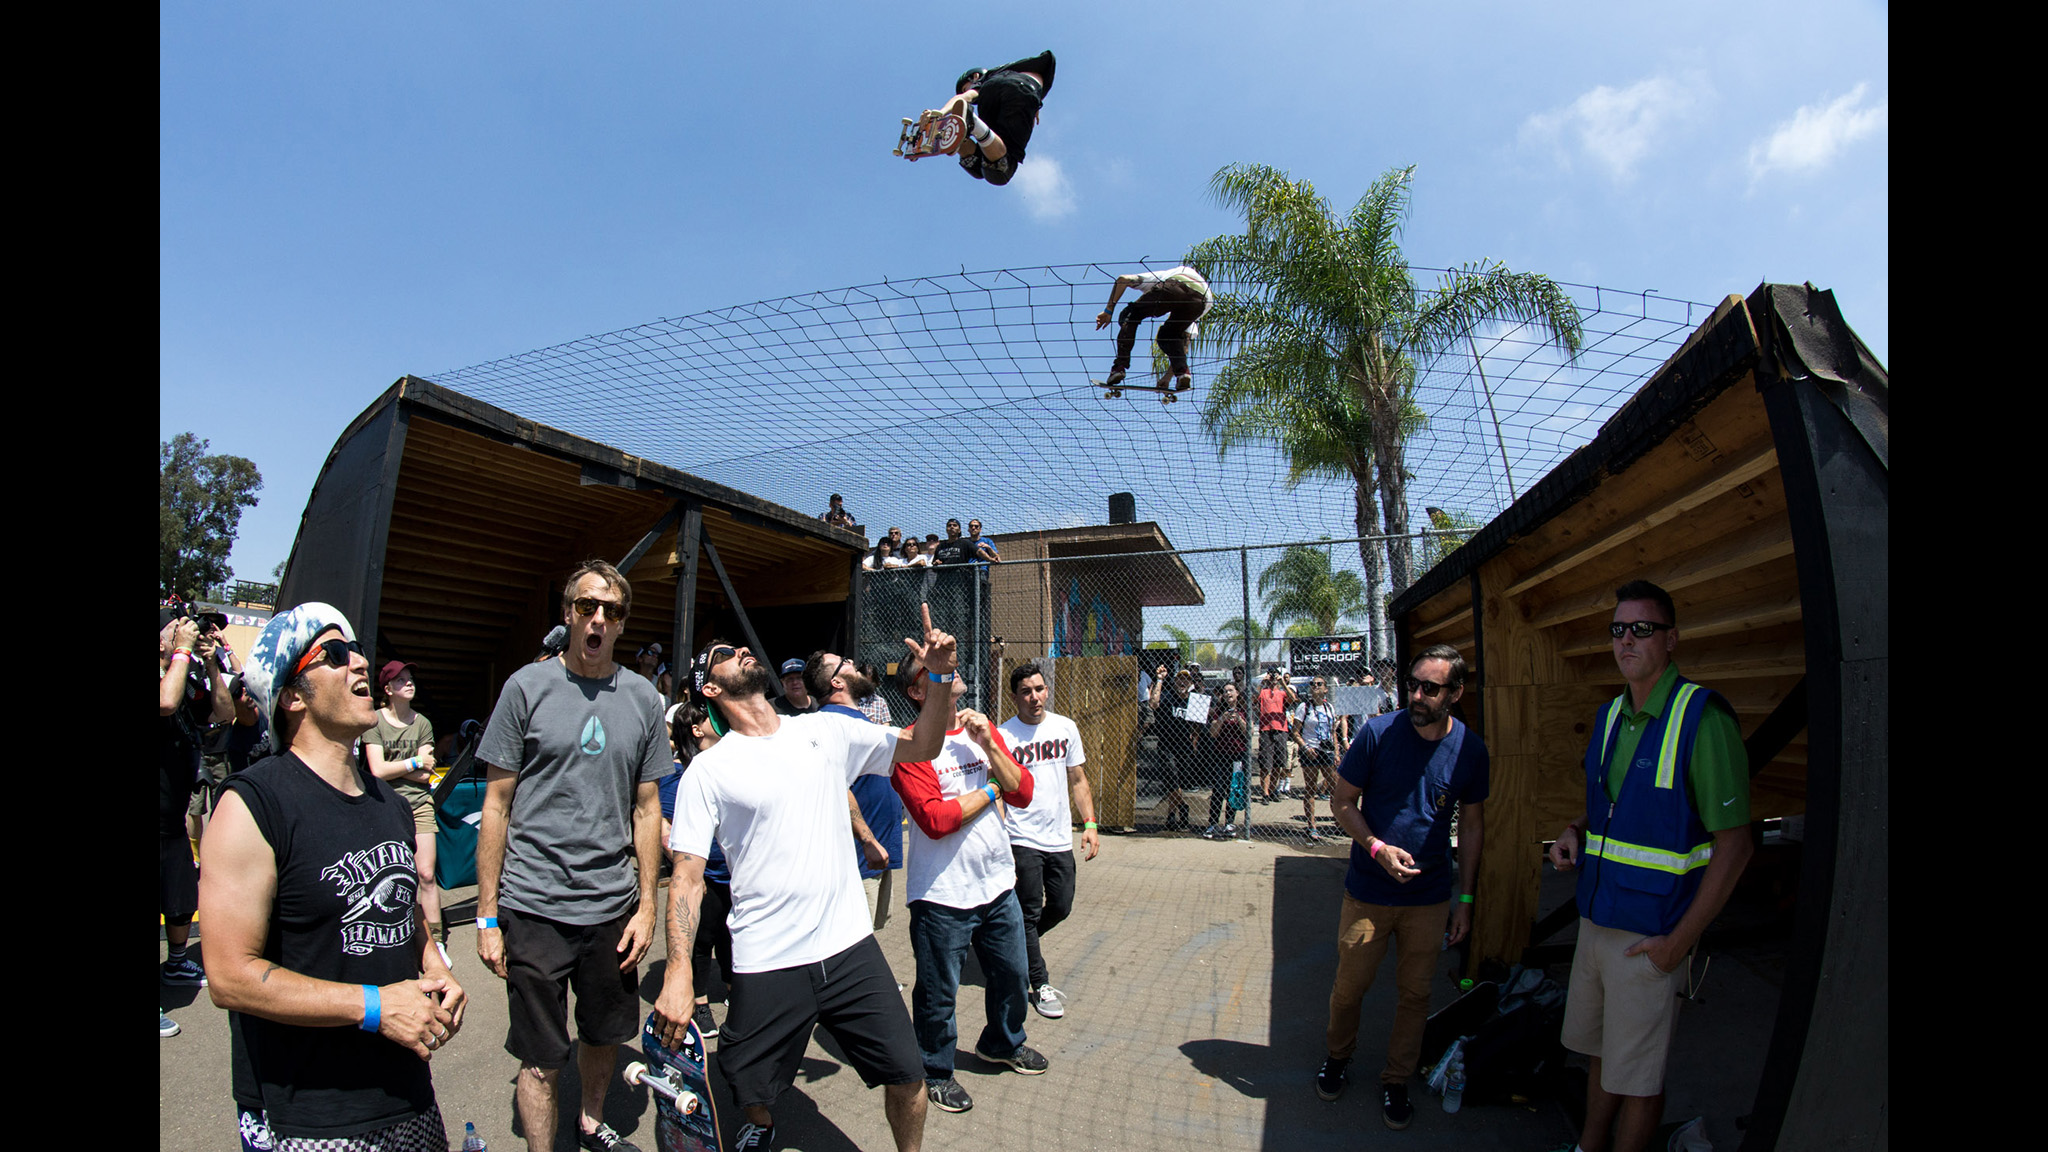 From left to right: Christian Hosoi, Tony Hawk and Bob Burnquist survey the racing.